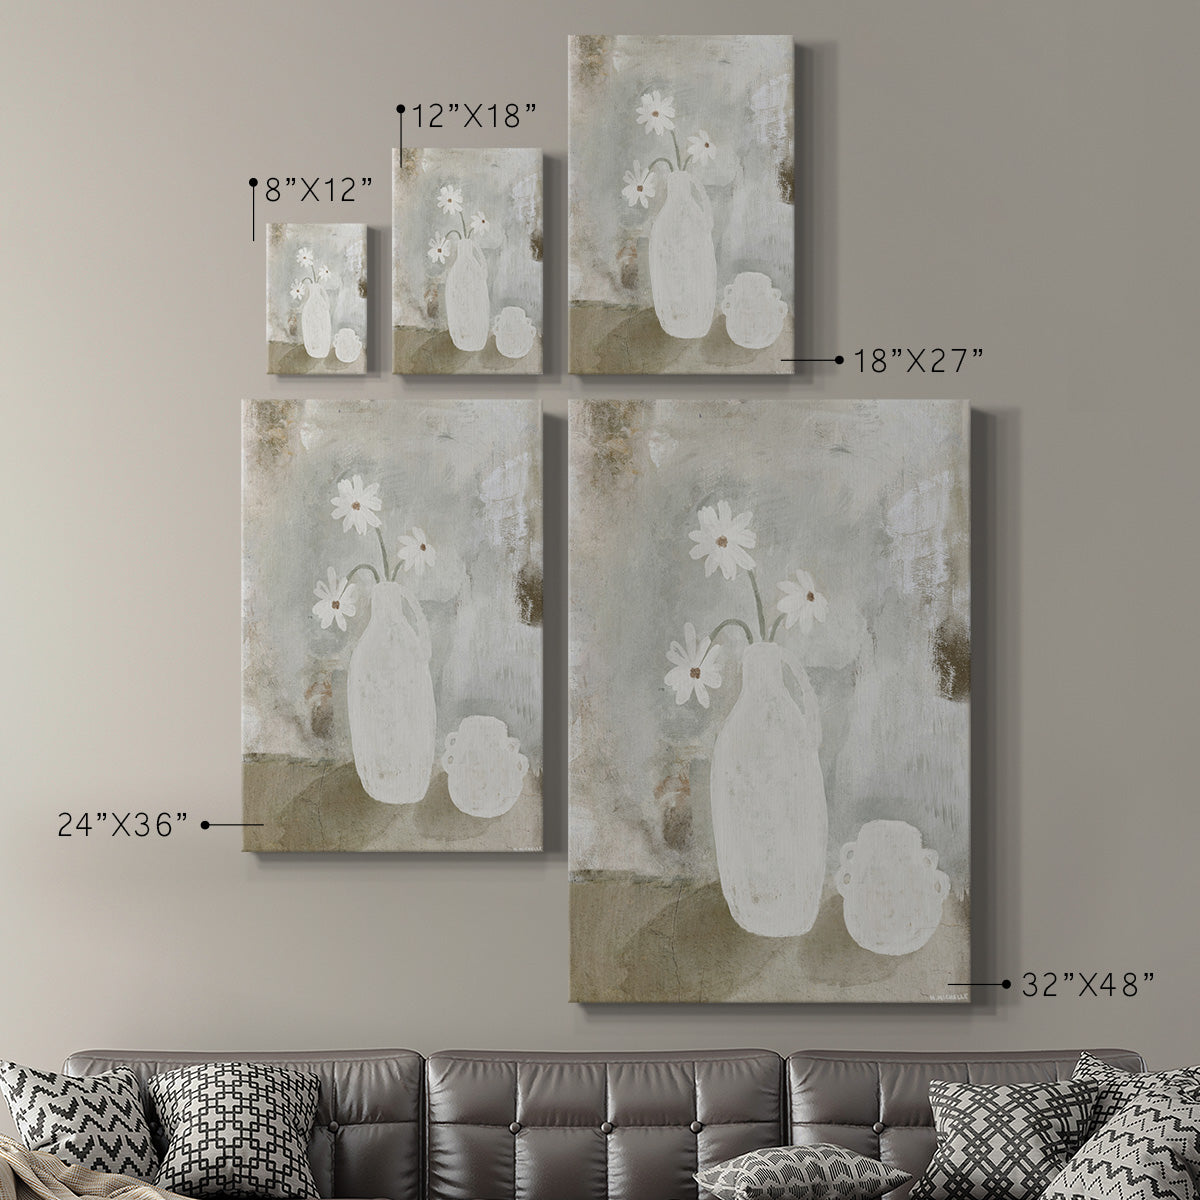 Sunday Blooms Premium Gallery Wrapped Canvas - Ready to Hang